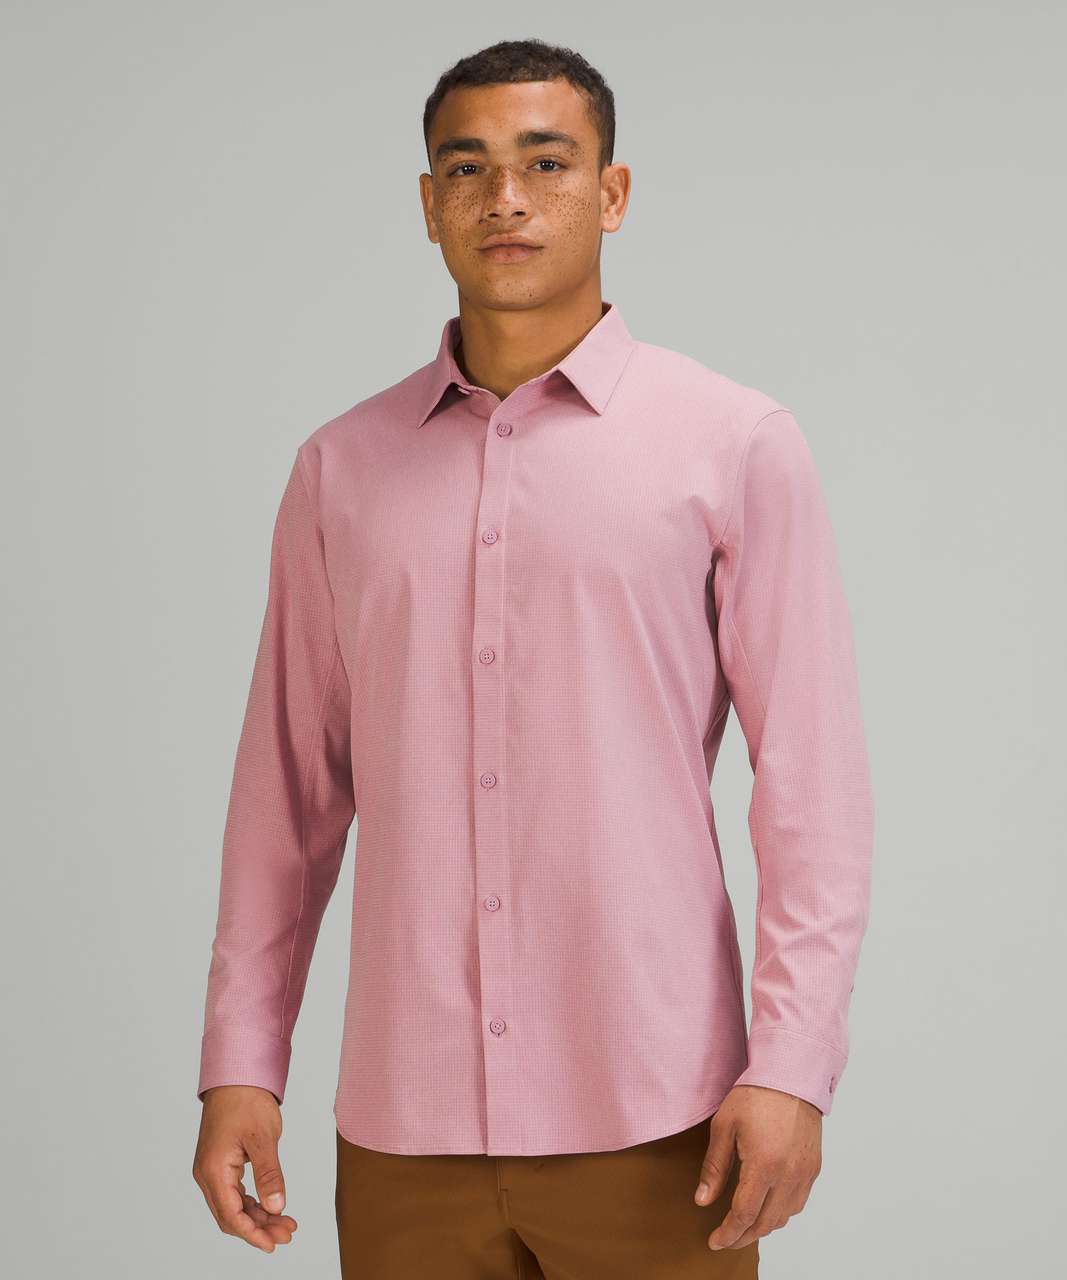 Lululemon Airing Easy Long Sleeve Button Up Shirt *Ventlight Mesh - Heathered Pink Taupe